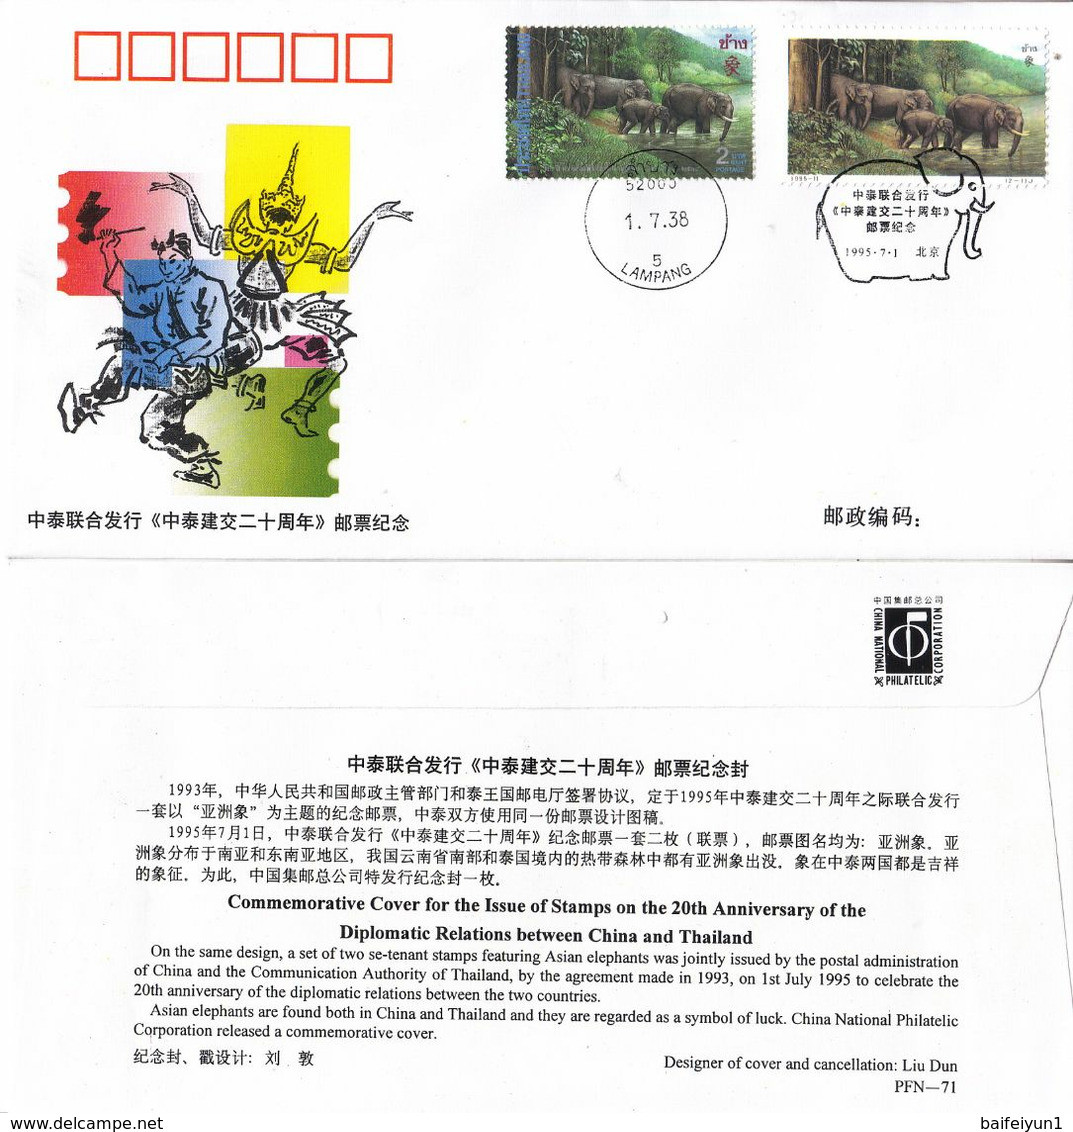 China 1995-11 (PFN-71) 20th Anniversary Of The Diplomatic Relations Between China And Thailand-Commemorative Cover - Joint Issues